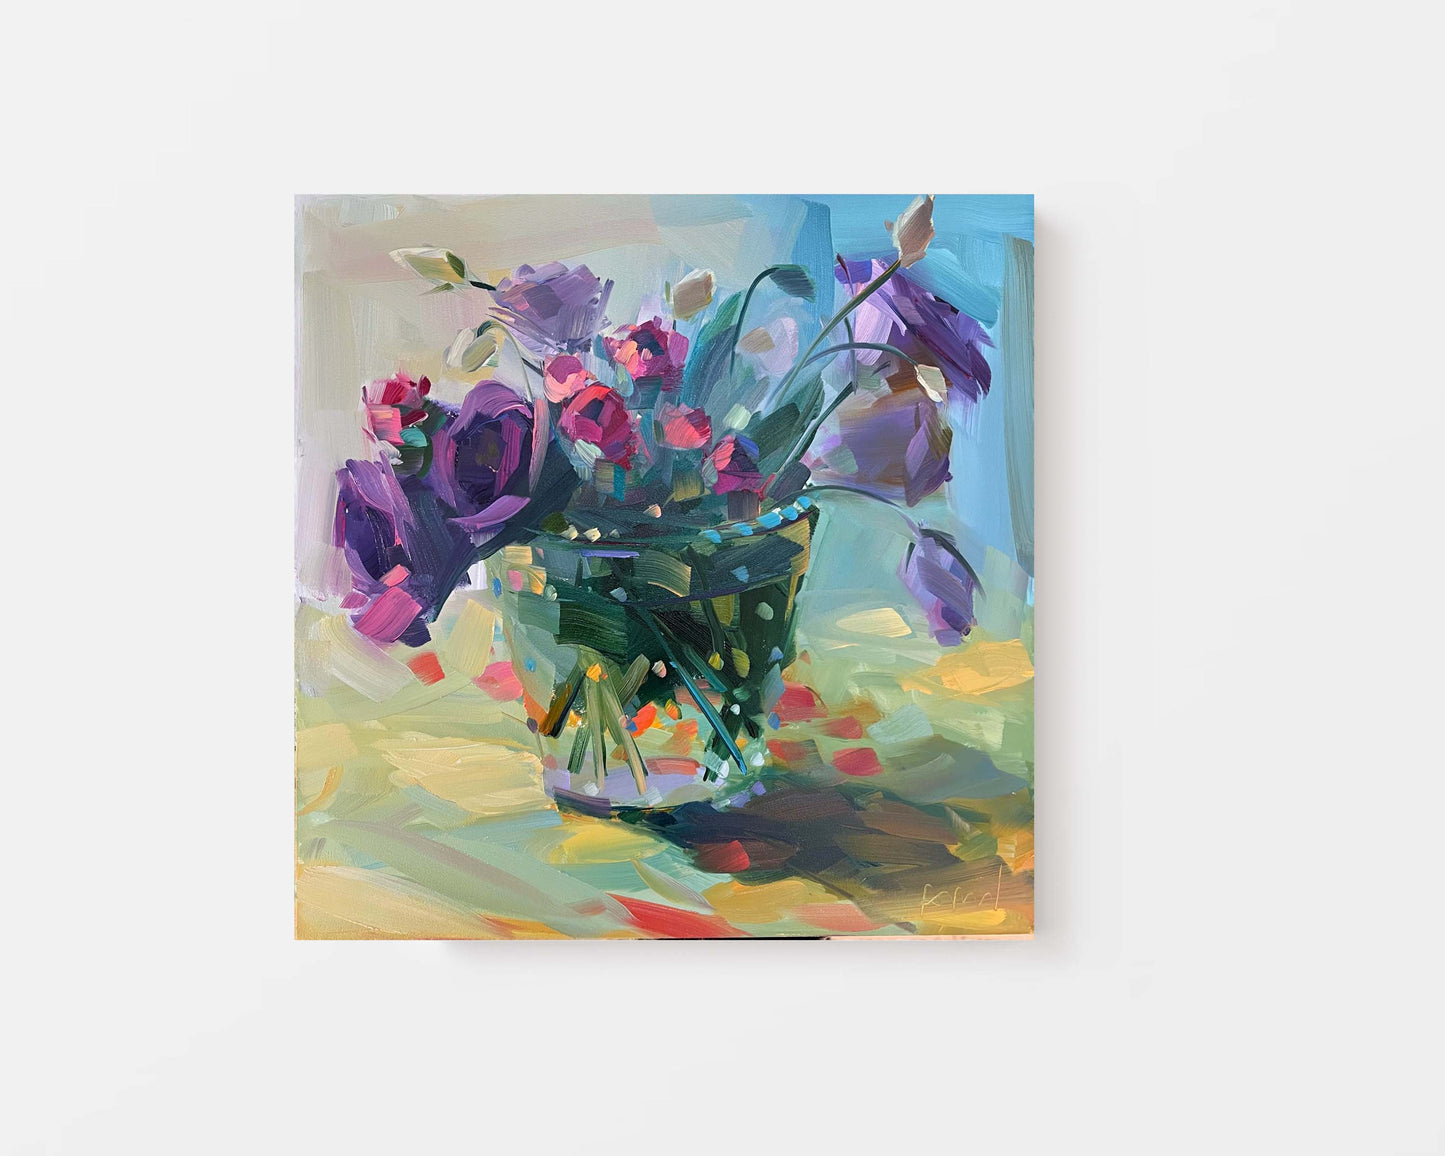 Lisianthus and Carnations, Original Oil Painting, 12 x 12 x 1/8", oil on panel